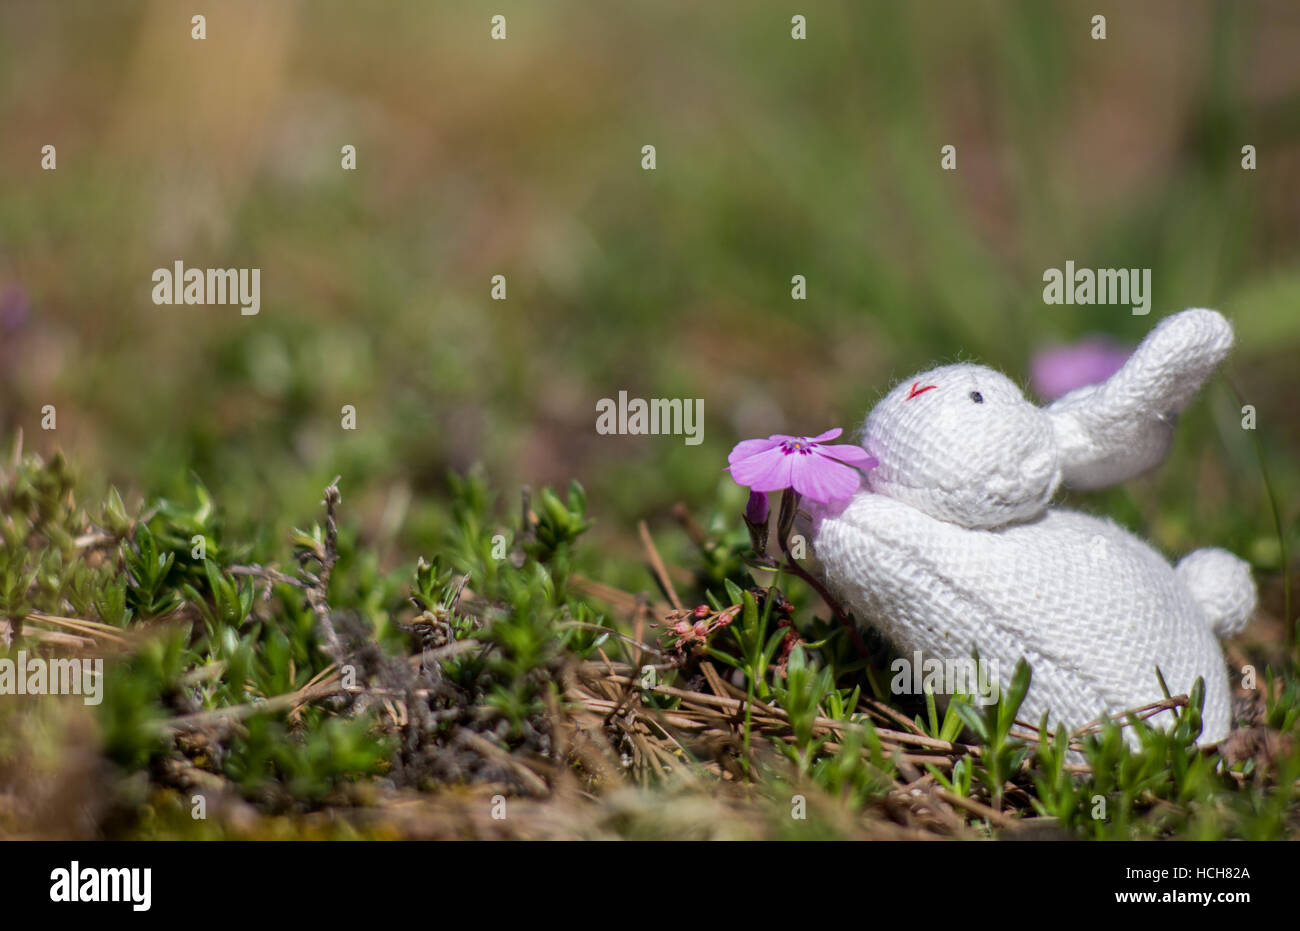 Toy stuffed rabbit posed to sniff a purple flower Stock Photo